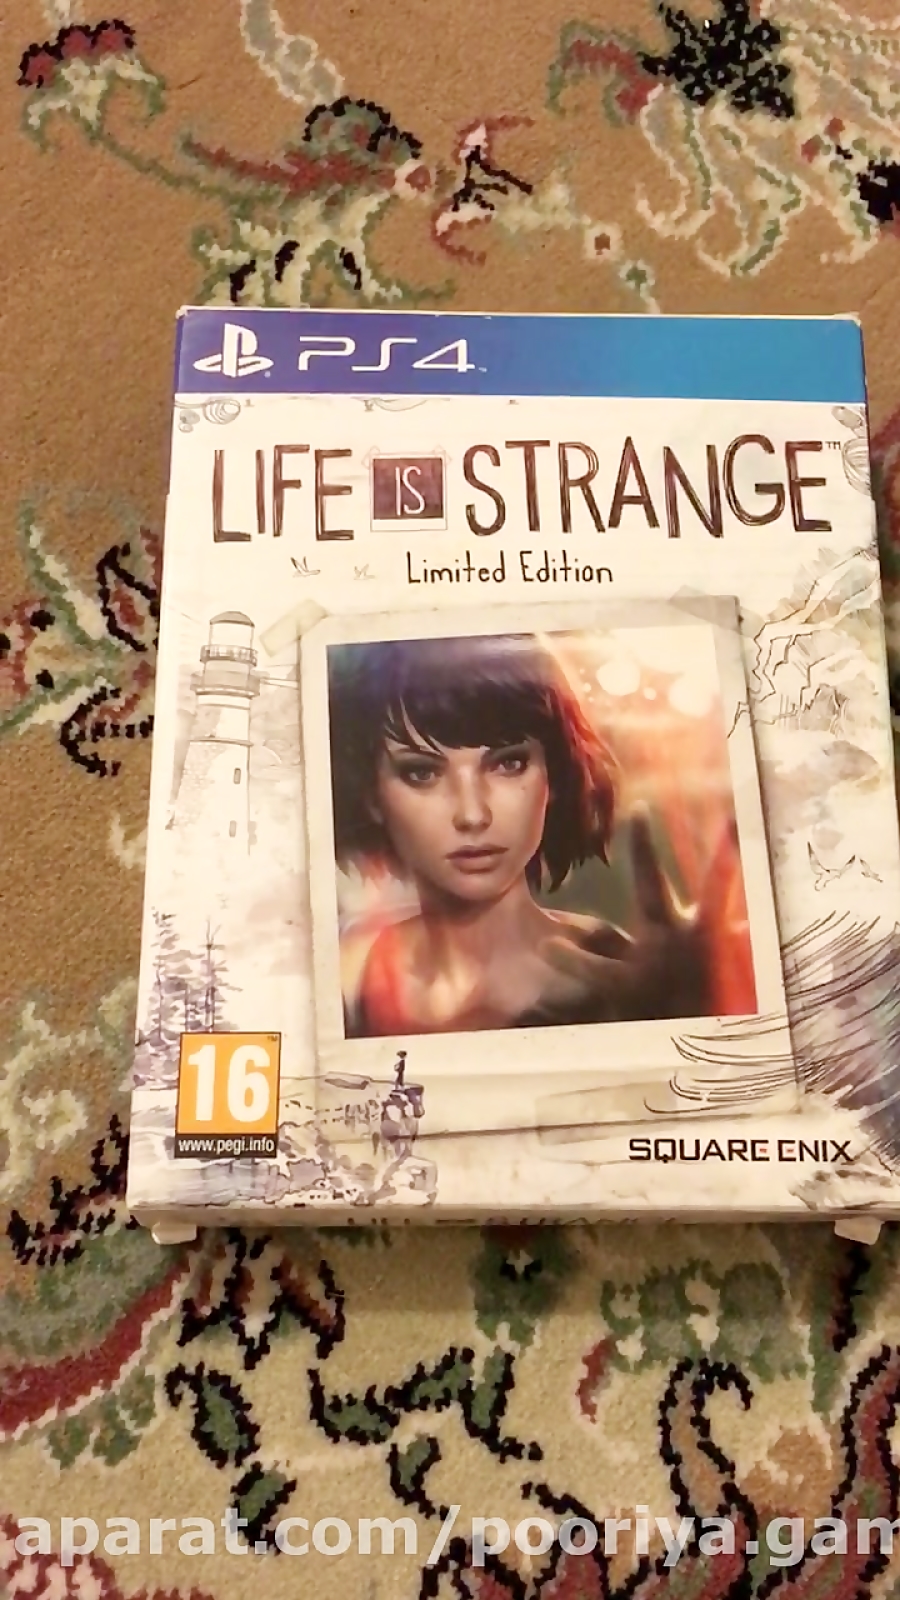 Unboxing life is strange limited edition